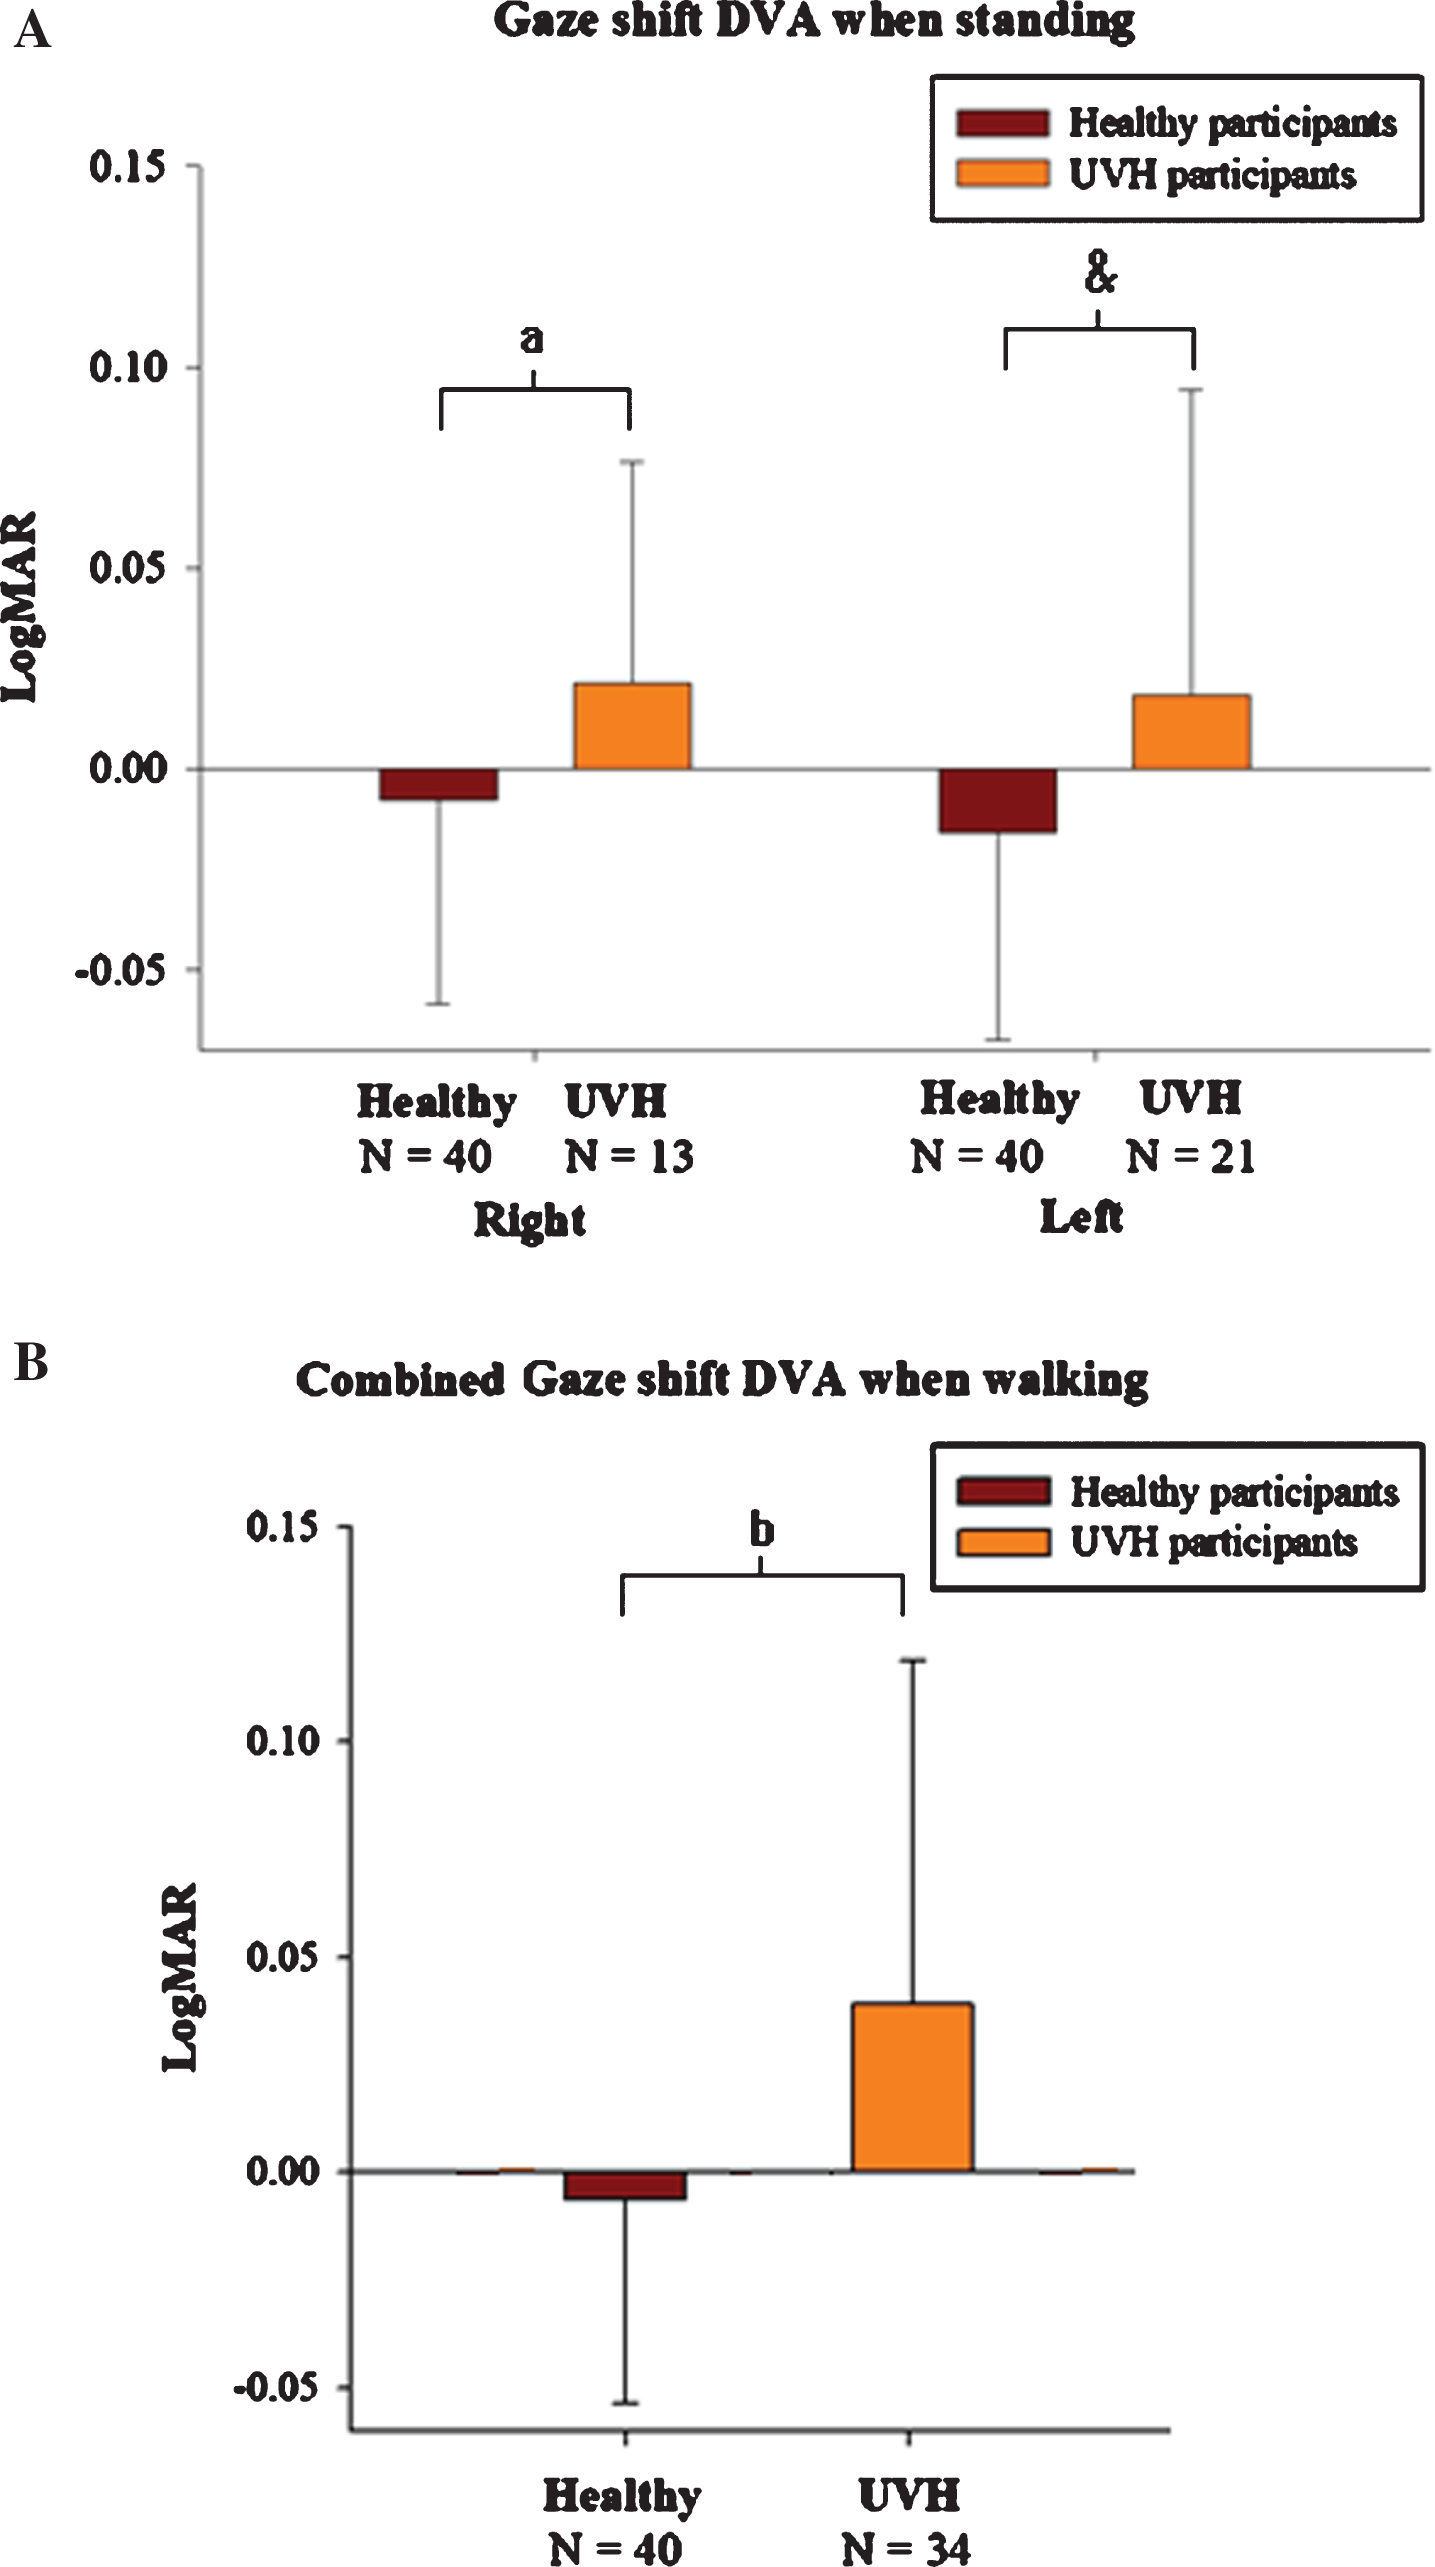 Gaze shift DVA by lesion of UVH. Regardless of controlling for static or dynamic conditions, individuals with UVH have worse gsDVA scores during A). standing and B). walking than do healthy controls (combined). a represents p = 0.041, & represents p = 0.05, and b represents p < 0.01.